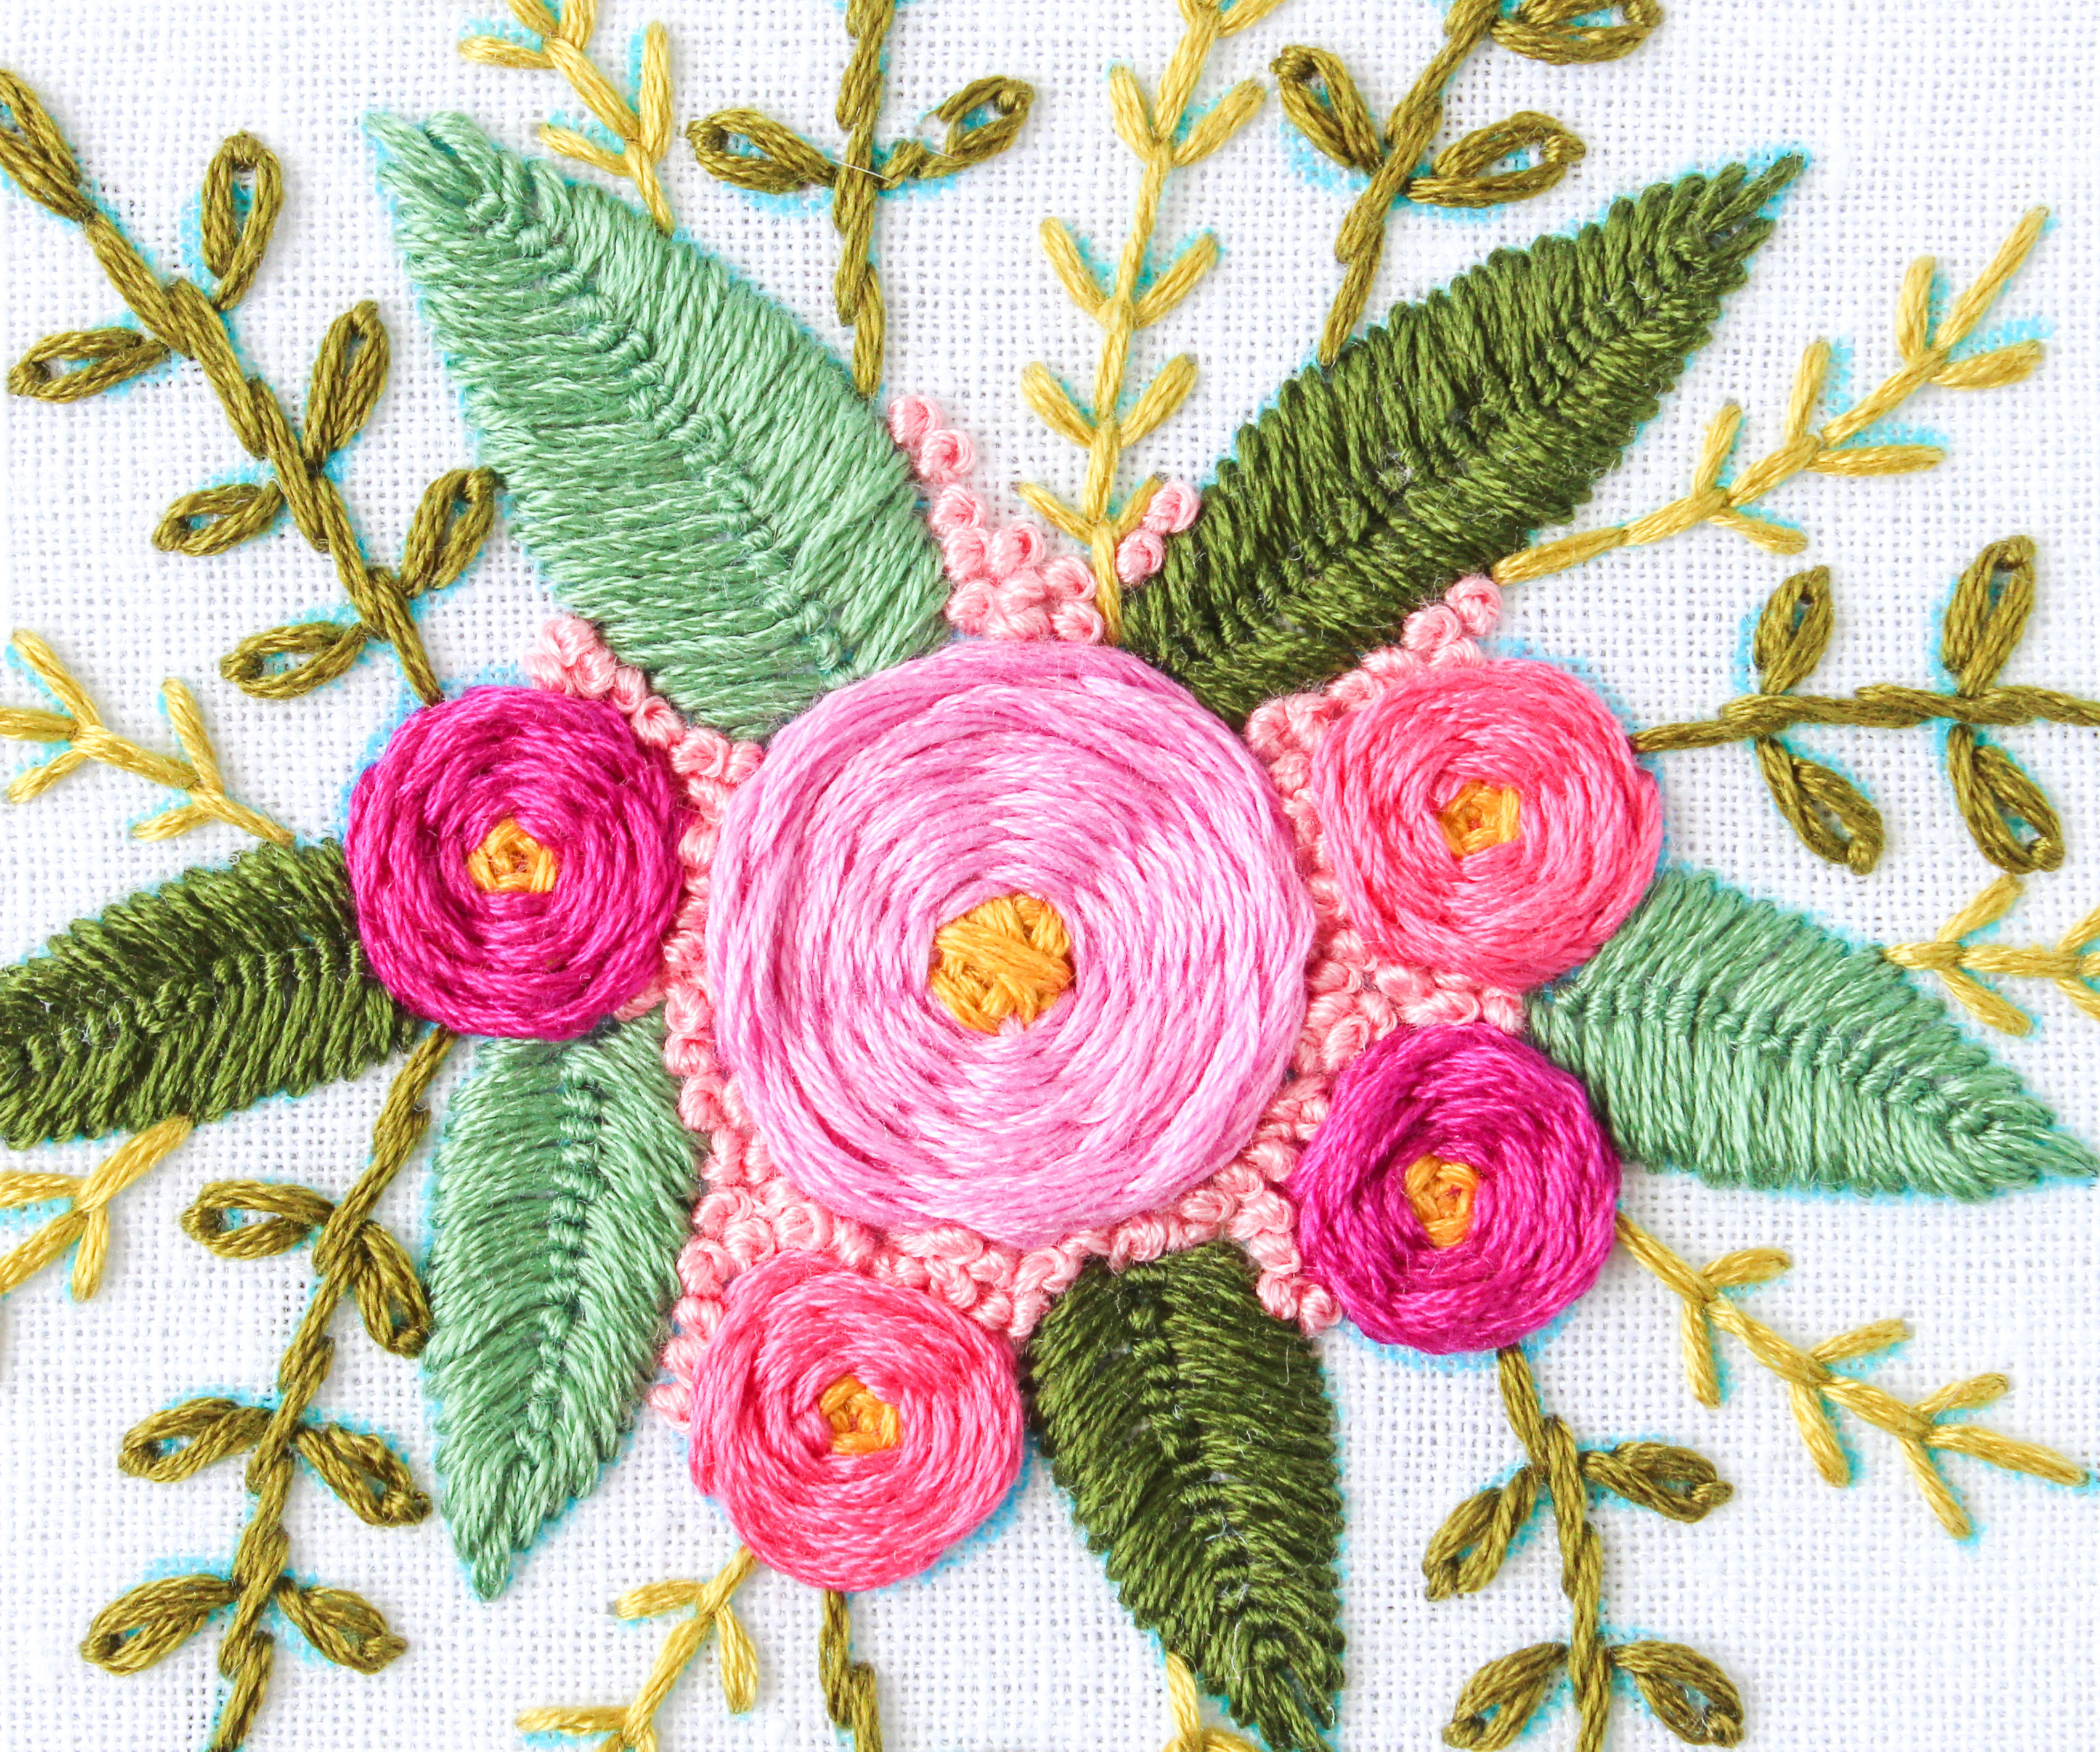 Rose Patterns For Embroidery How To Hand Embroider Flowers 7 Steps With Pictures